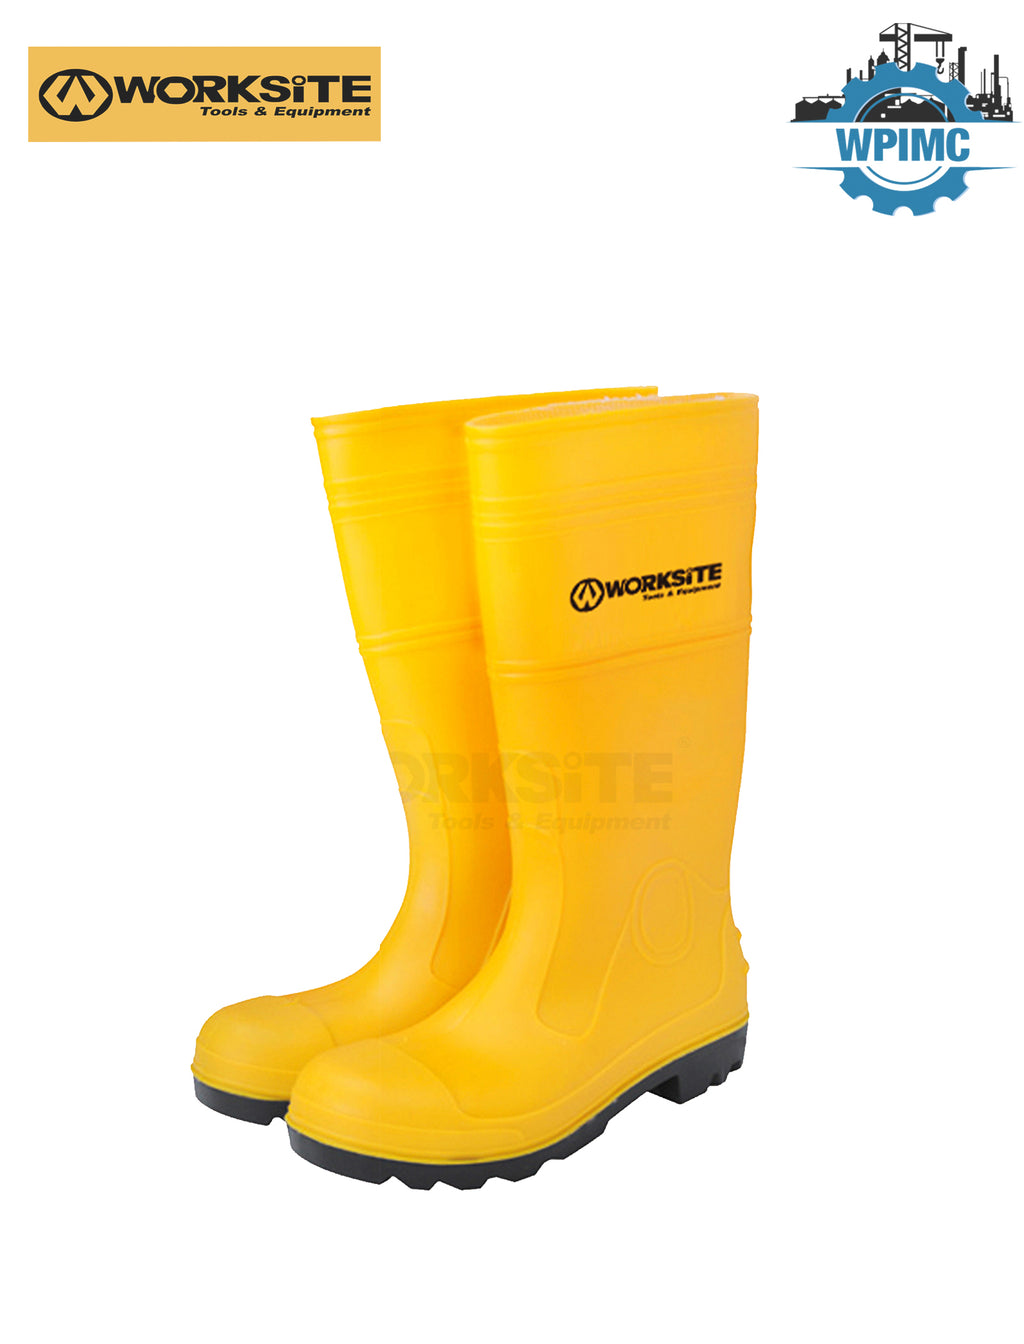 WORKSITE SAFETY BOOTS WT8300